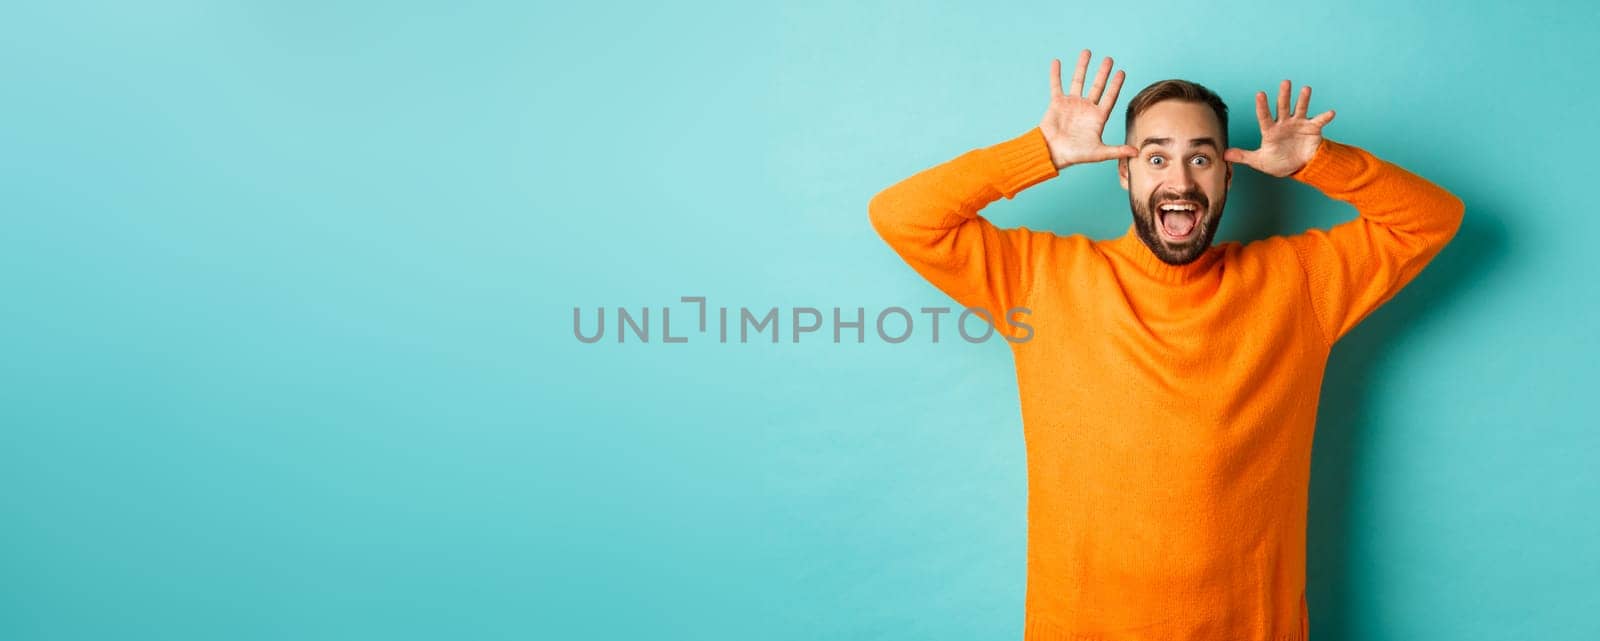 Image of handsome caucasian man making funny faces, mocking someone and smiling, standing against light blue background.